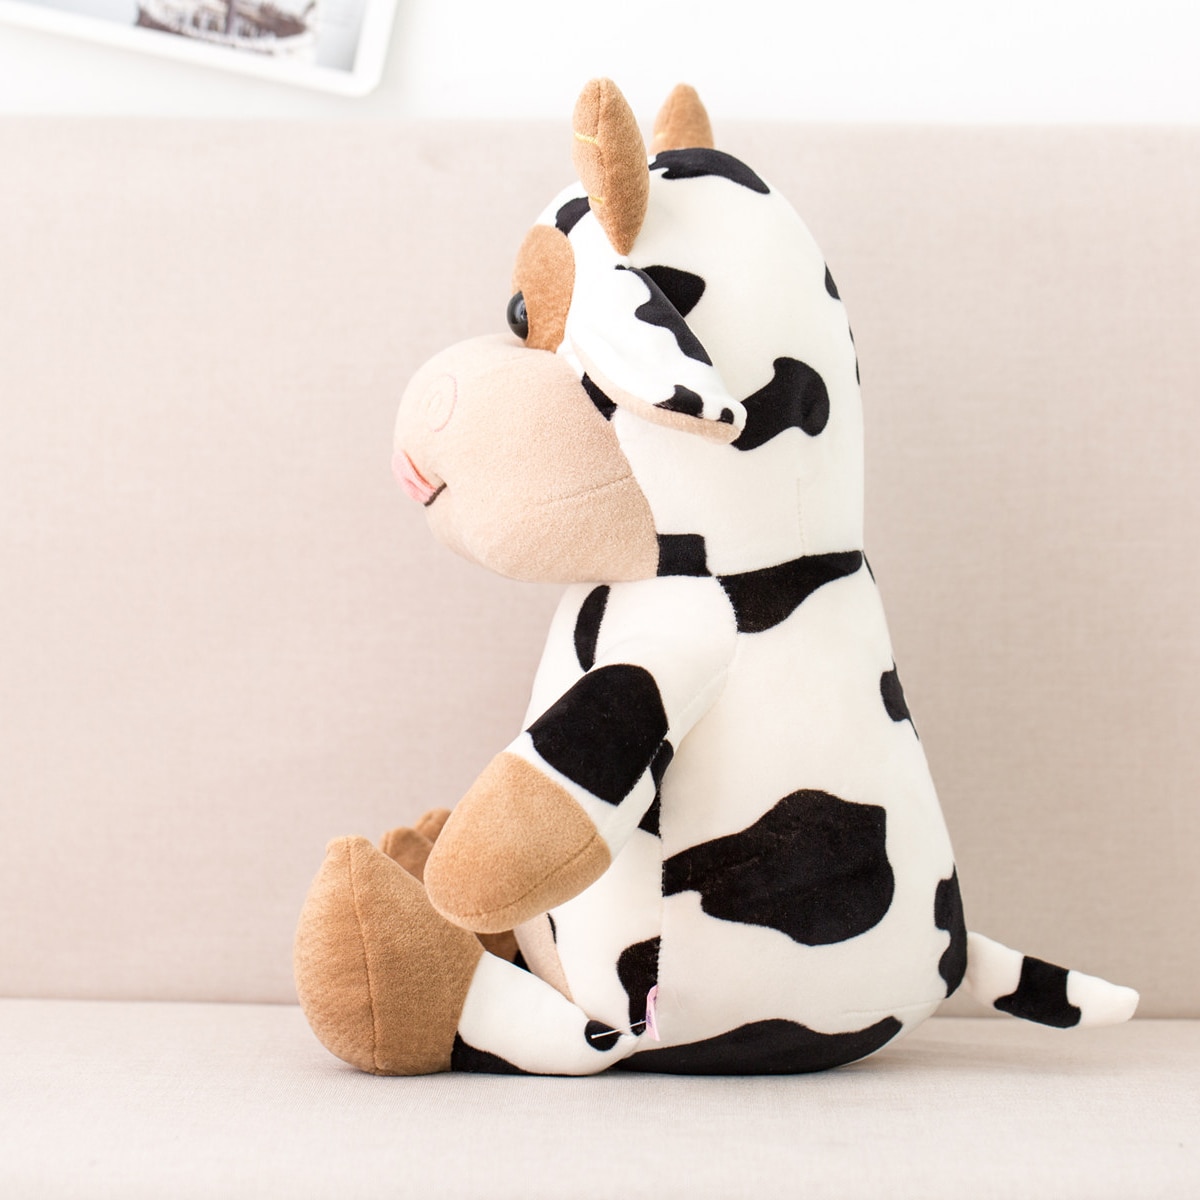 2020 New Plush Cow Toy Cute Cattle Plush Stuffed Animals Cattle Soft Doll Kids Toys Birthday 2 - The Cow Print